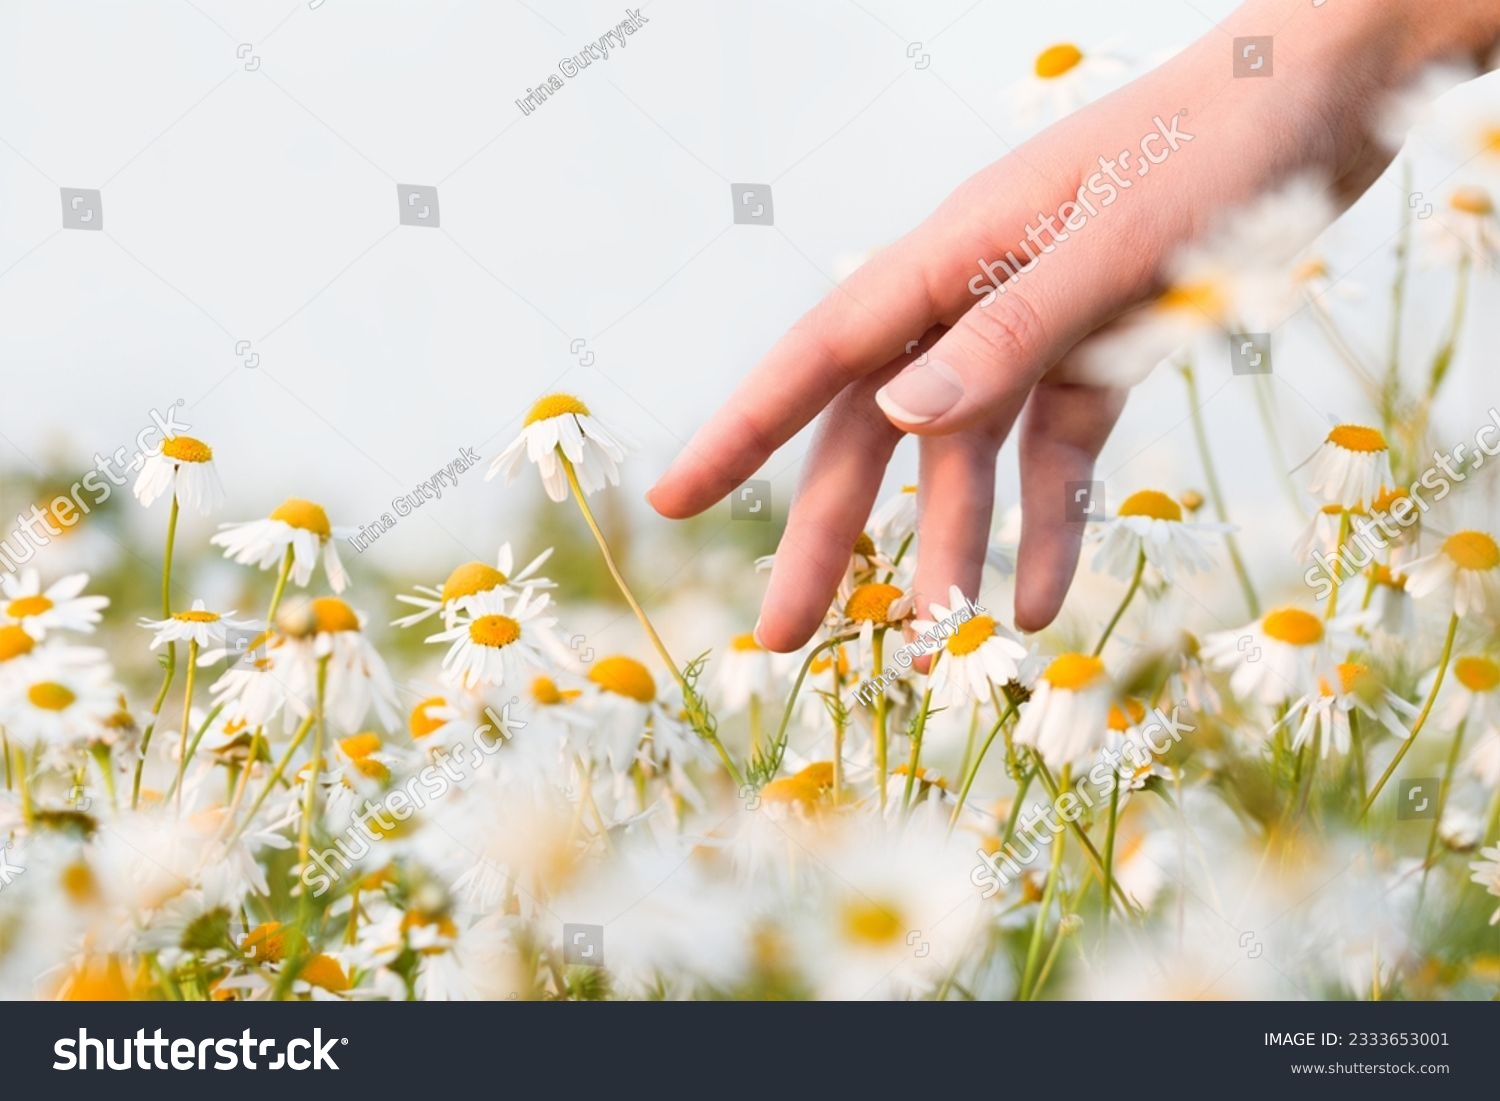 female hand touching daisies in the field, close-up #2333653001